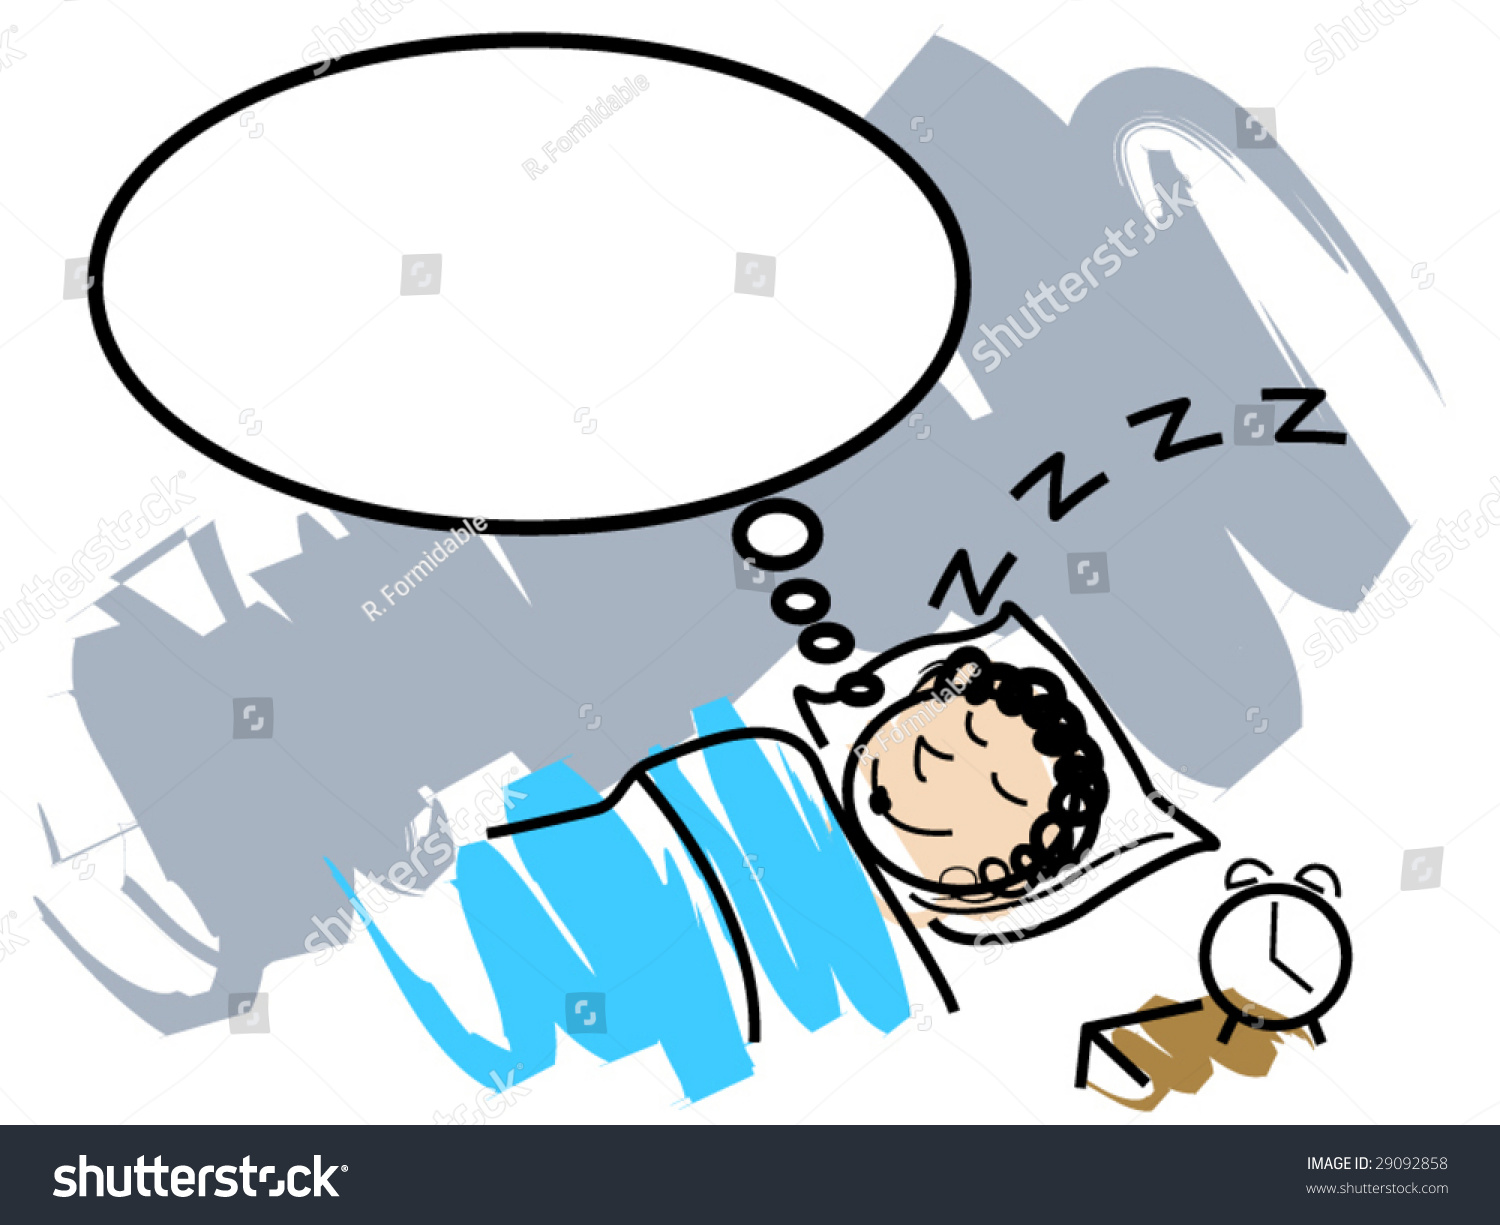 Comical Vector Illustration Of A Woman Having A Pleasant Dream...Image ...